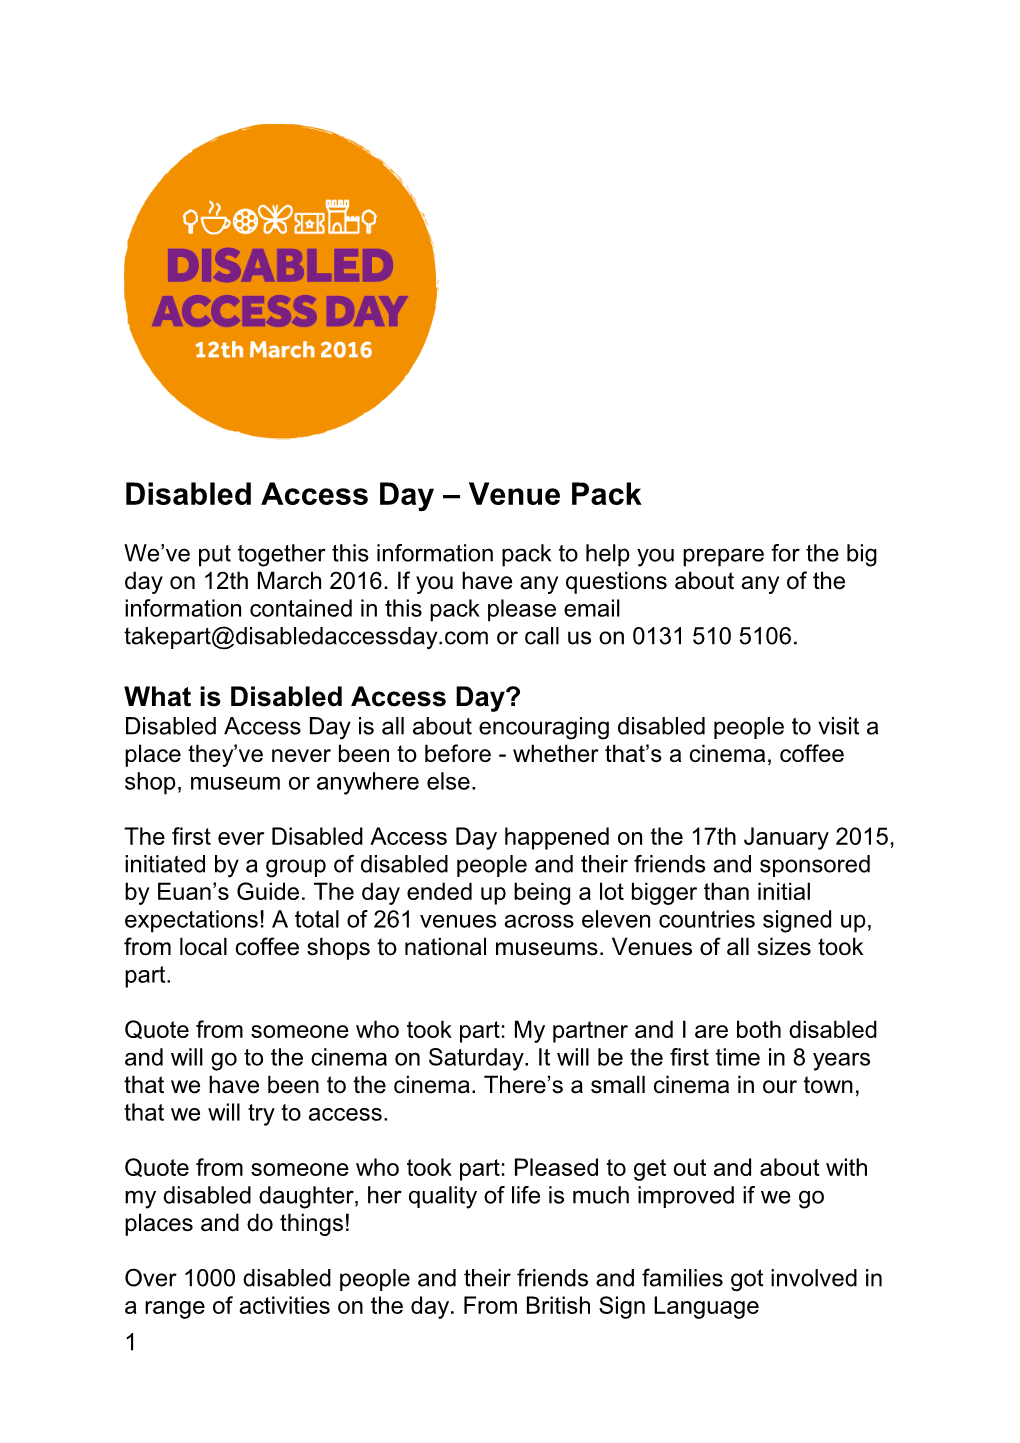 Disabled Access Day Venue Pack